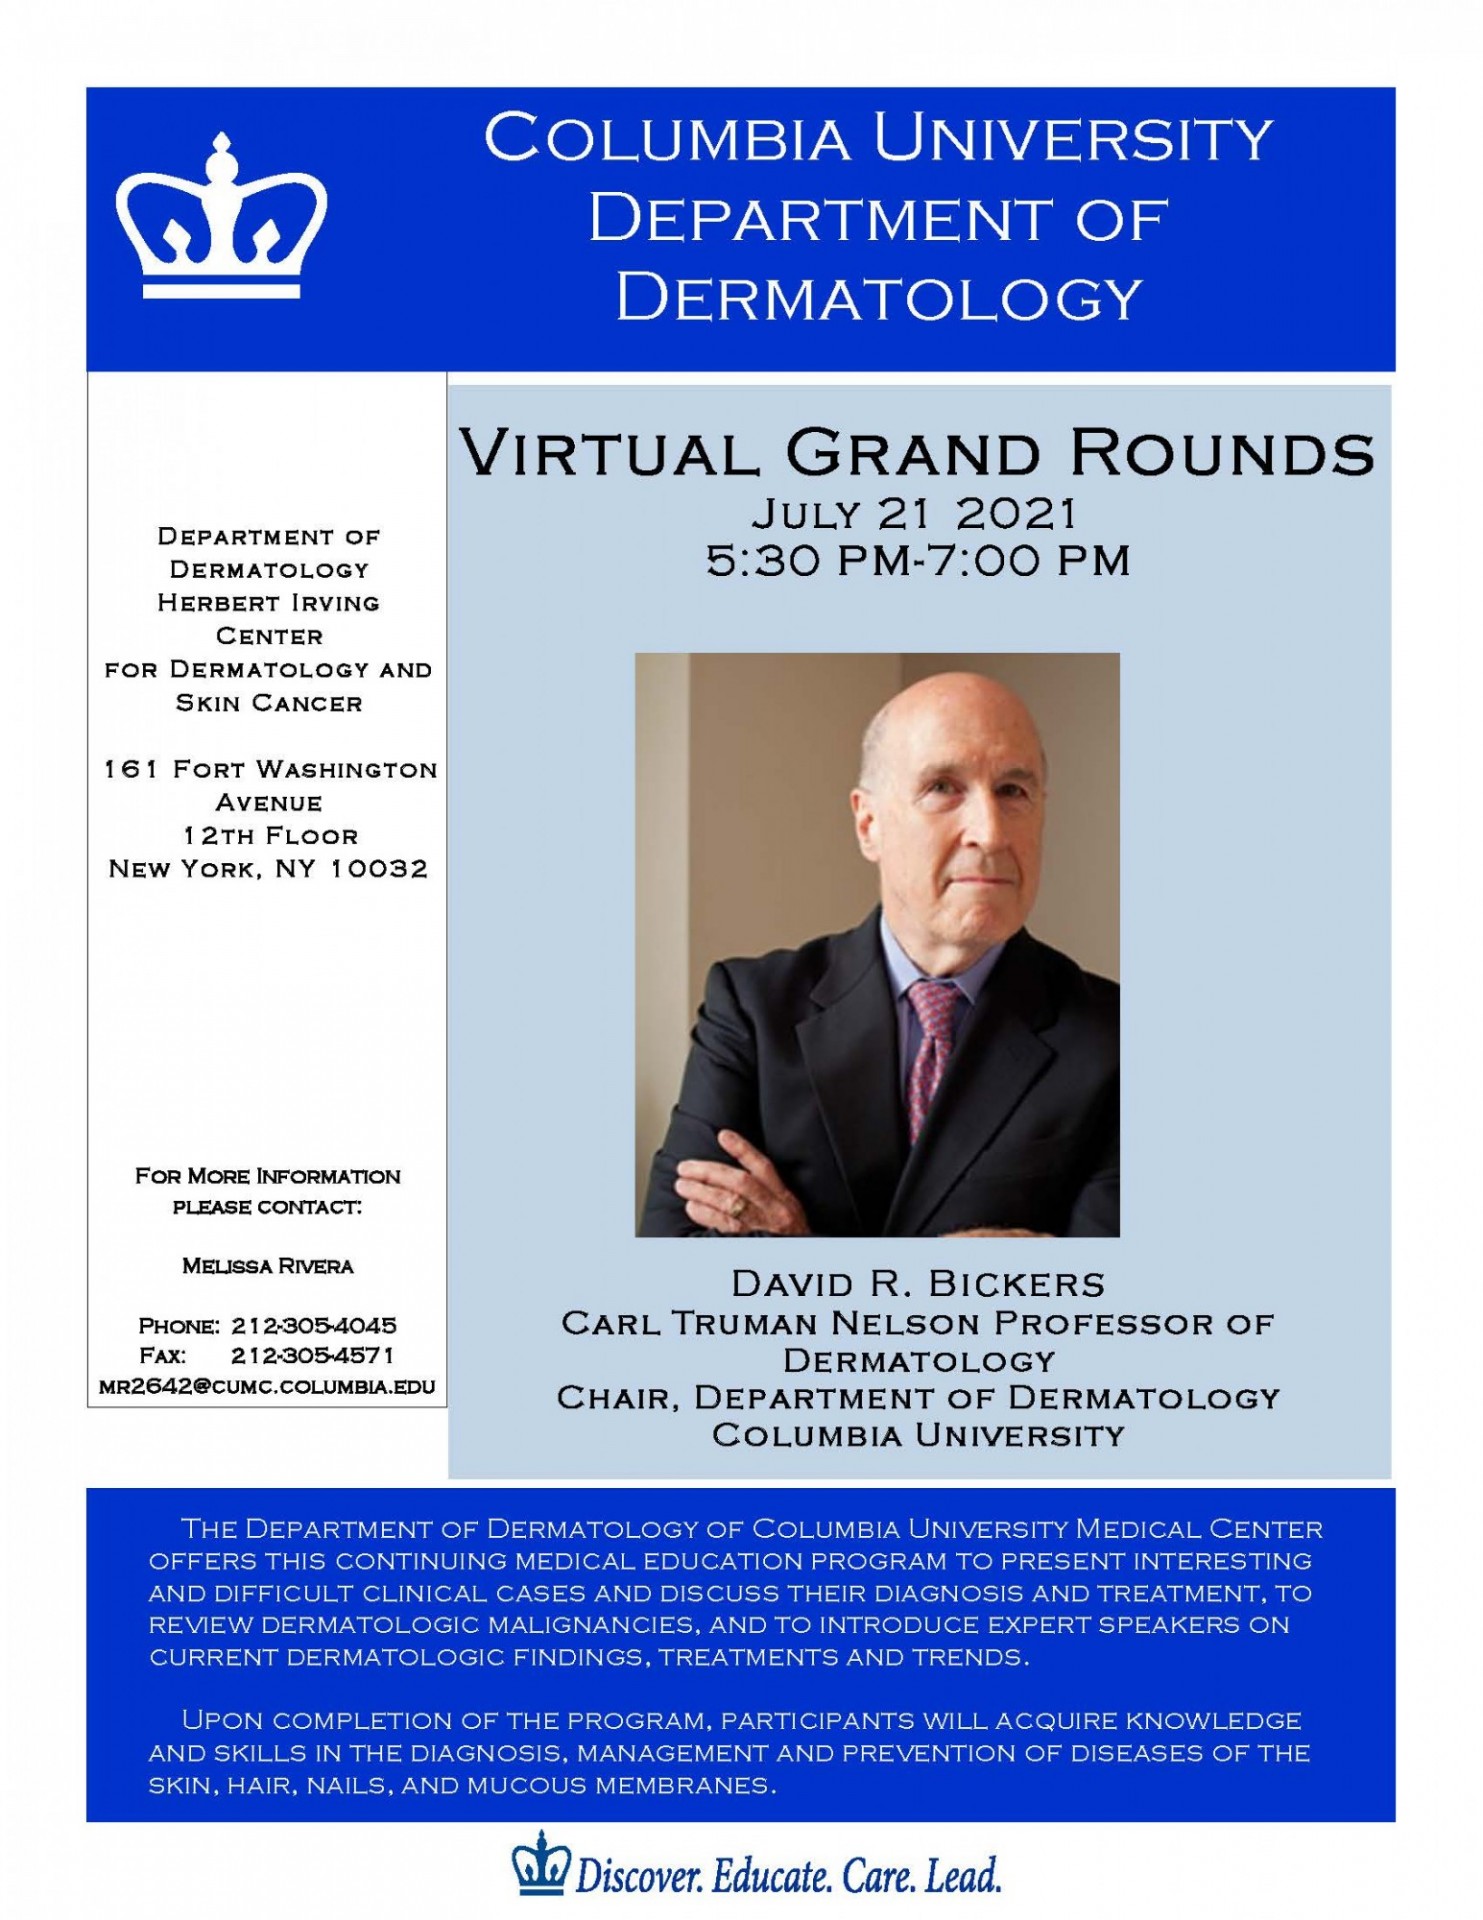 Dermatology - Research Grand Rounds Speakers 